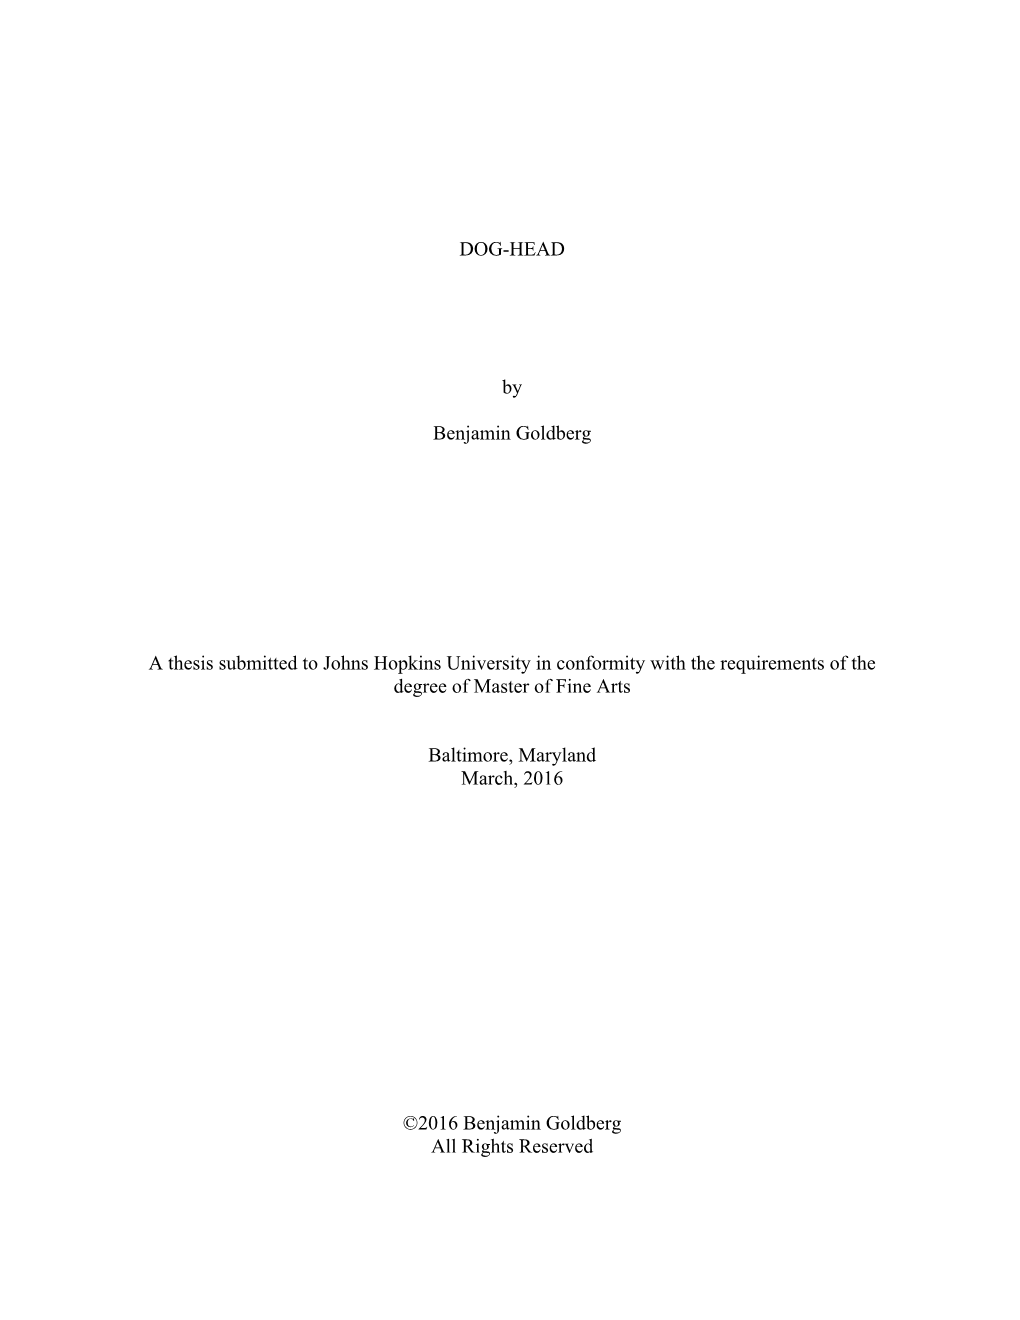 DOG-HEAD by Benjamin Goldberg a Thesis Submitted to Johns Hopkins